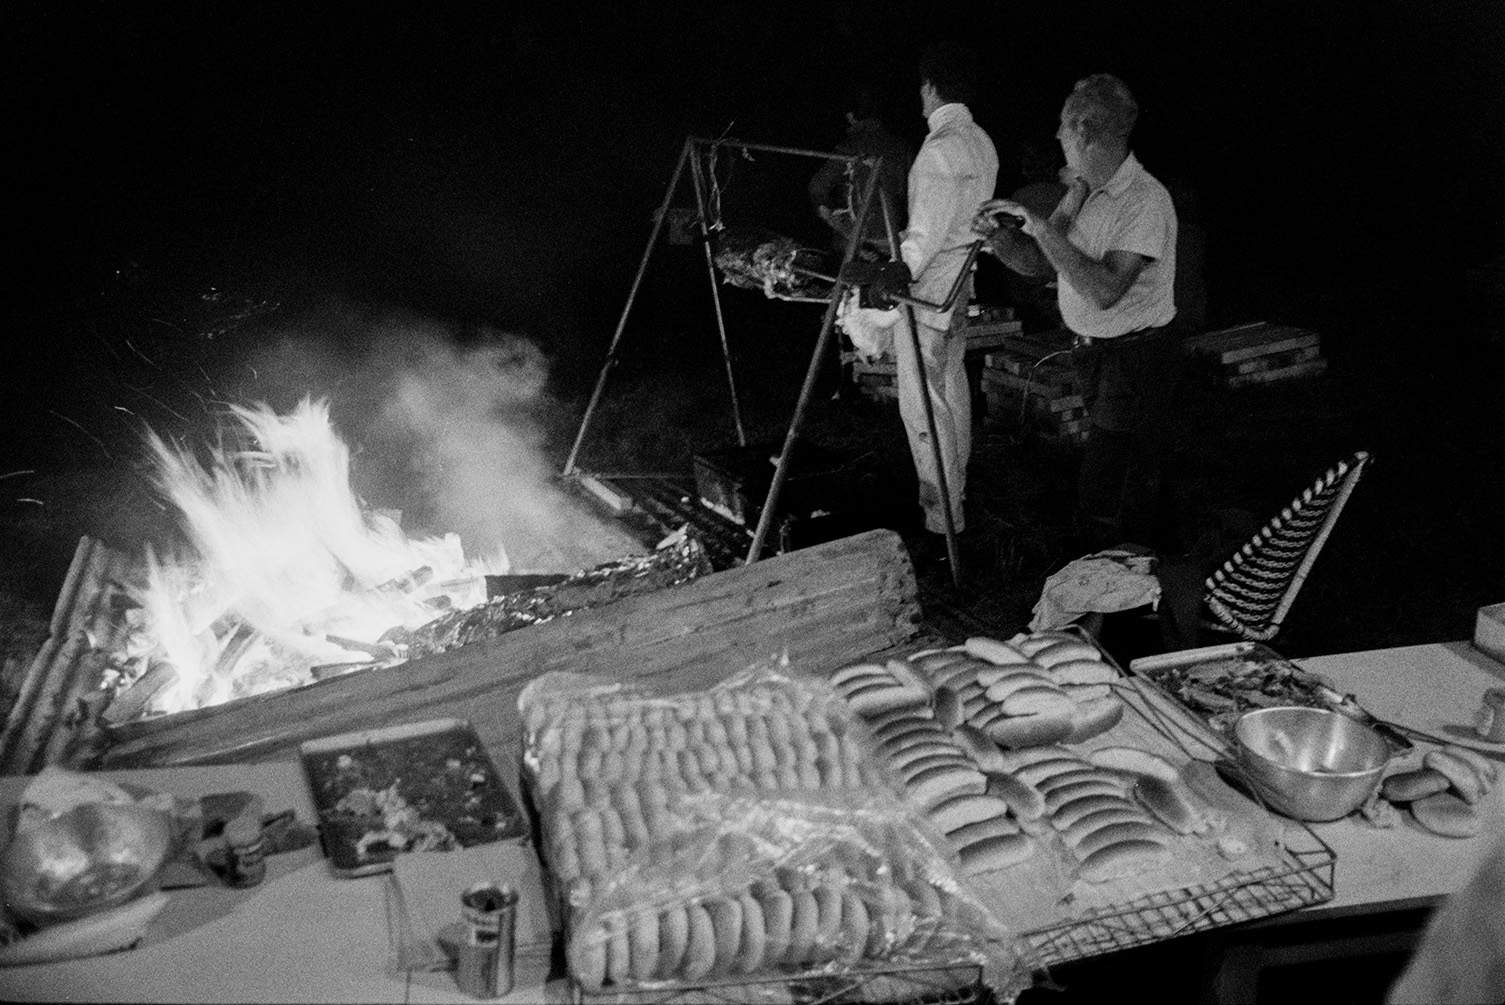 A man turning a spit roast by an open air fire at Torrington Water Carnival. A table with bread rolls and food is visible in the foreground.